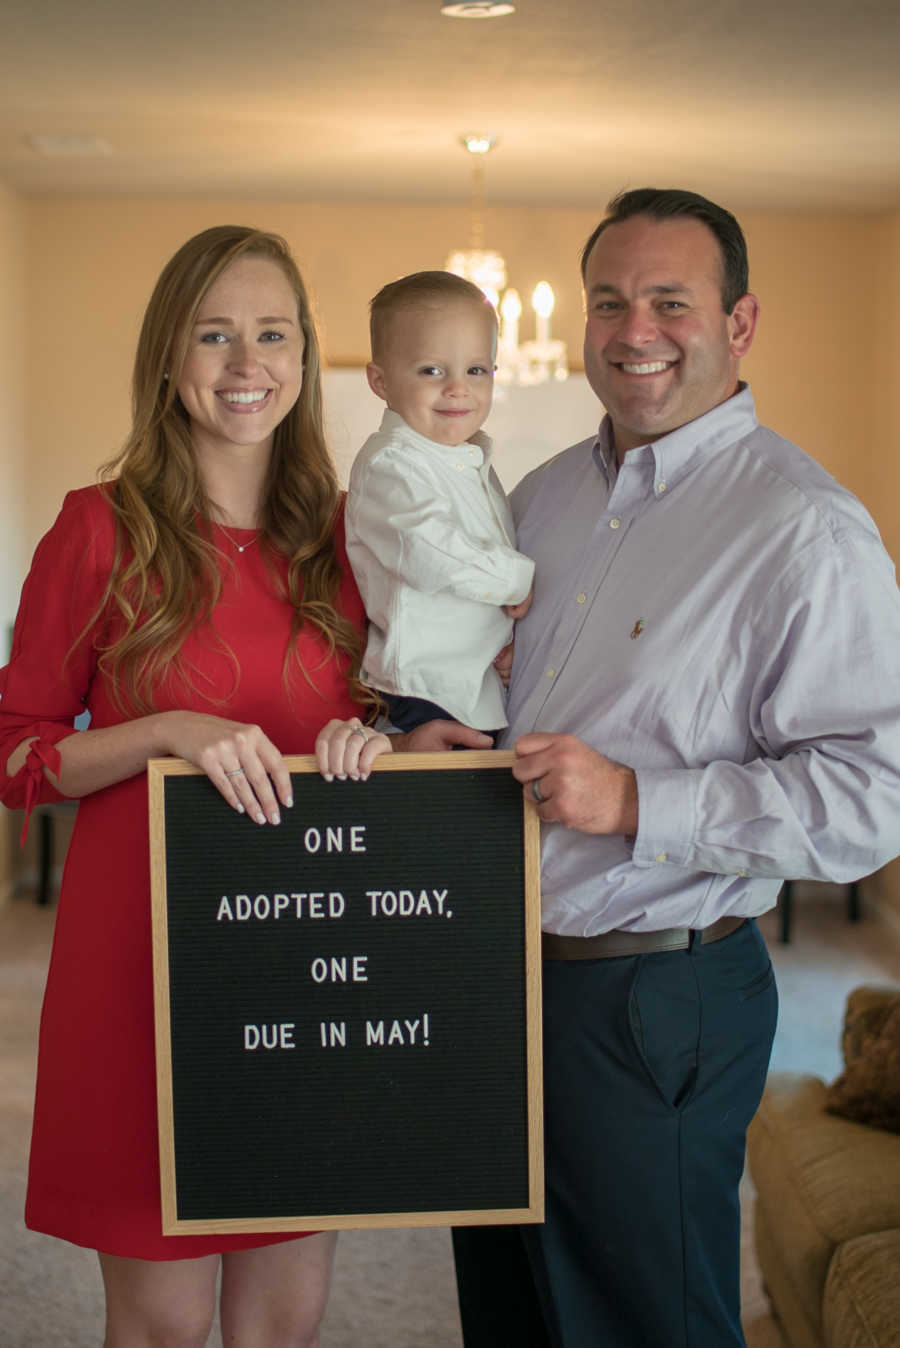 Husband and wife hold adopted son who is recovered from meth withdrawals and sign for baby announcement